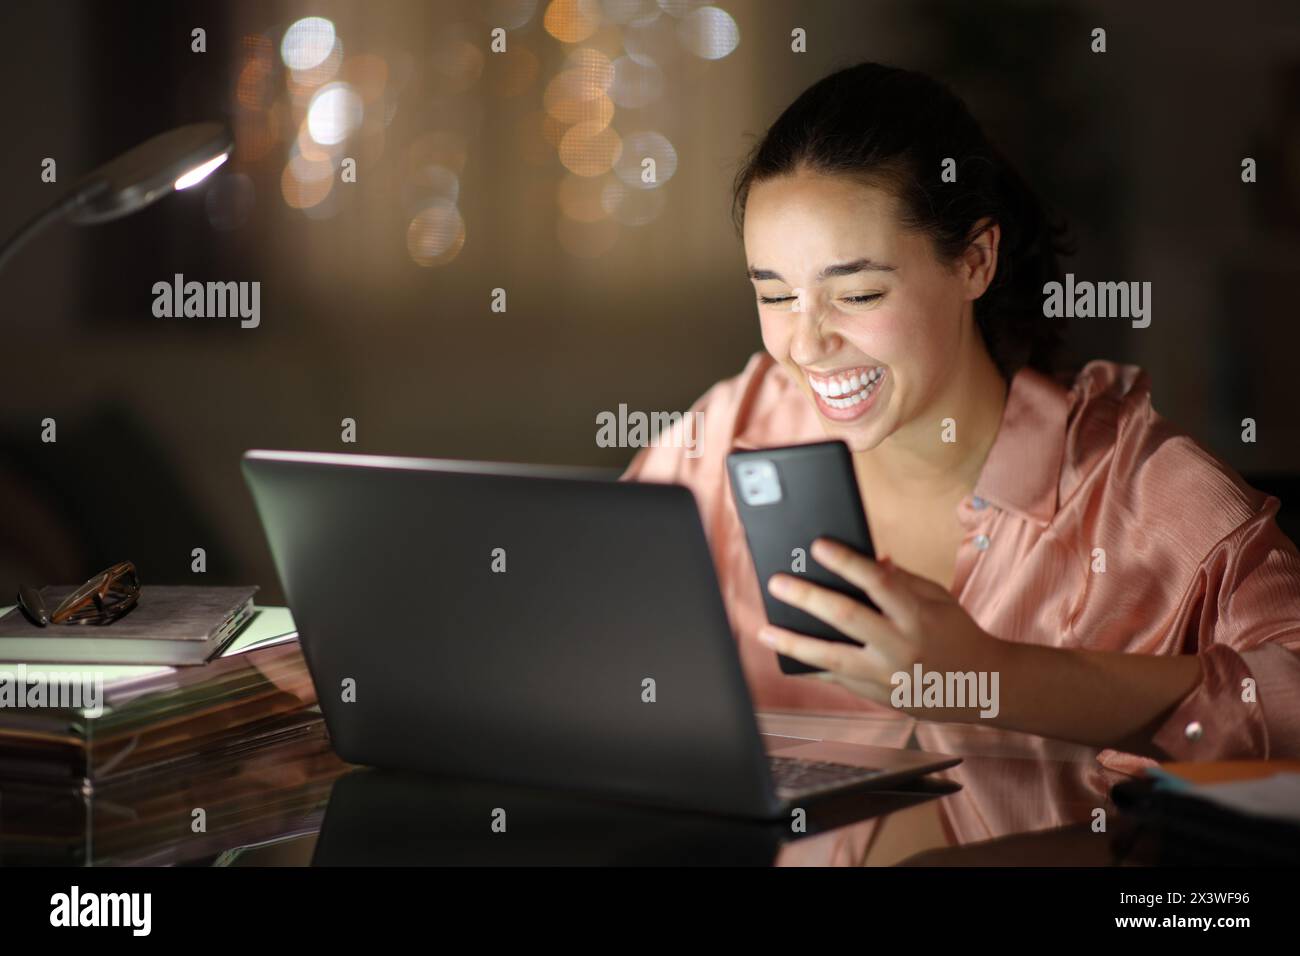 Happy tele worker in the night laughing hilariously checking phone at home Stock Photo